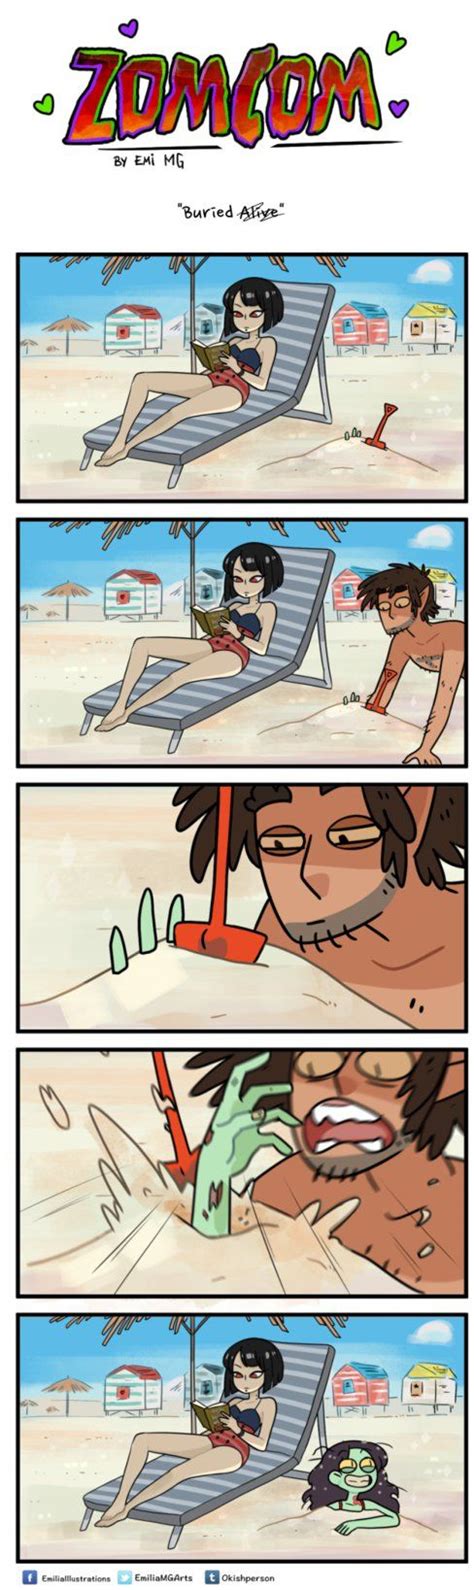 The Comic Strip Shows An Image Of A Man Laying On A Beach Chair And